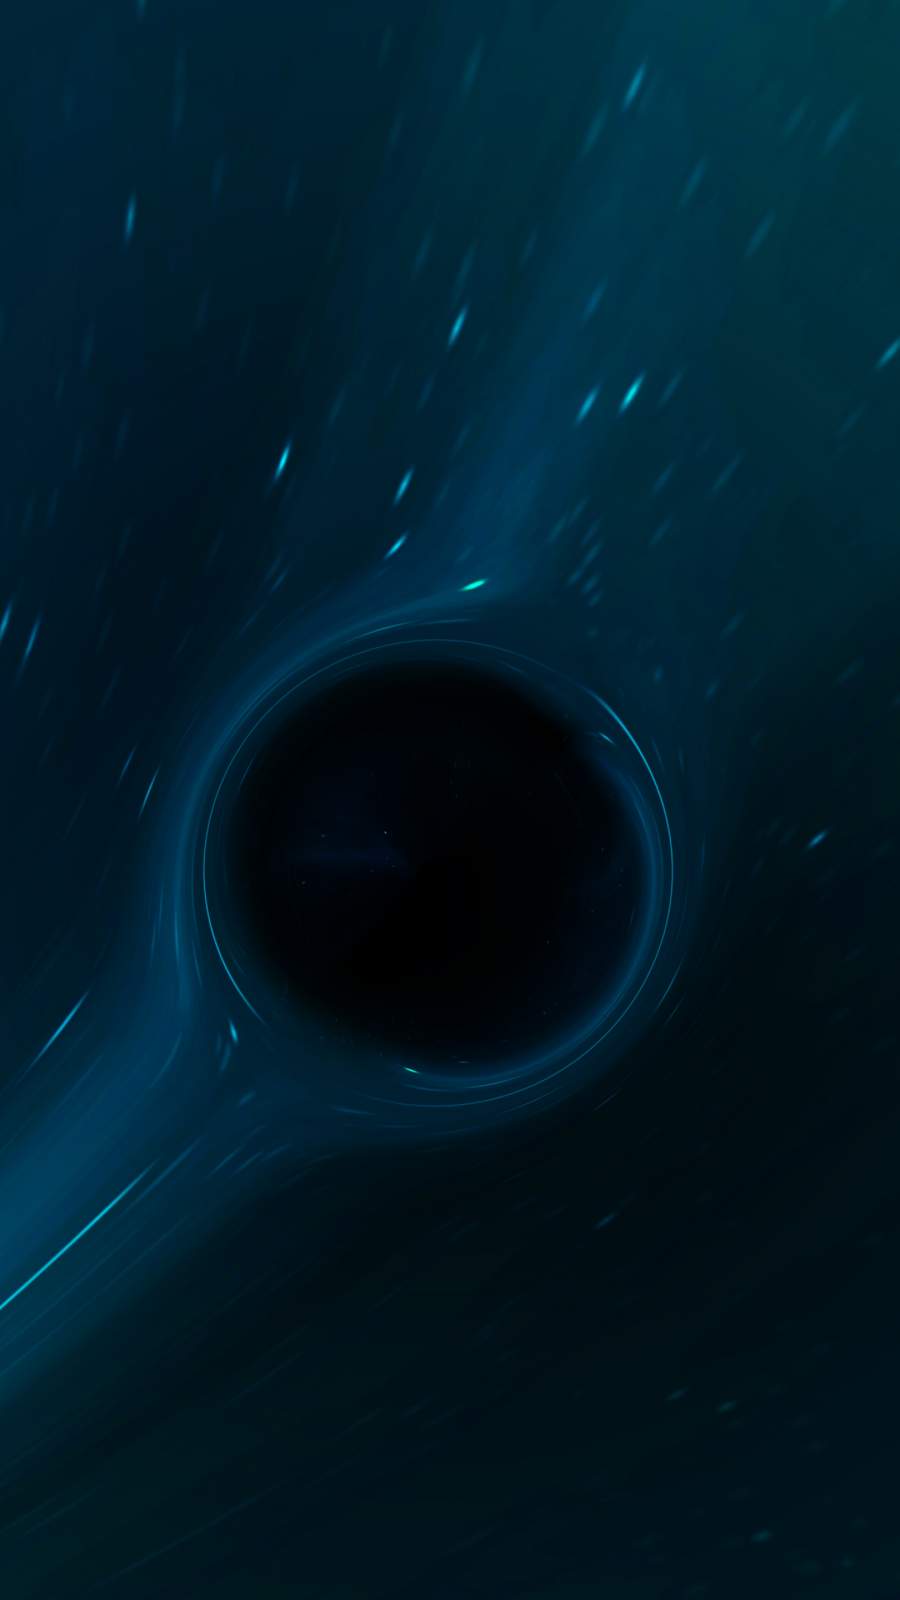 Black-Hole-Iphone-Wallpaper - Iphone Wallpapers : Iphone Wallpapers